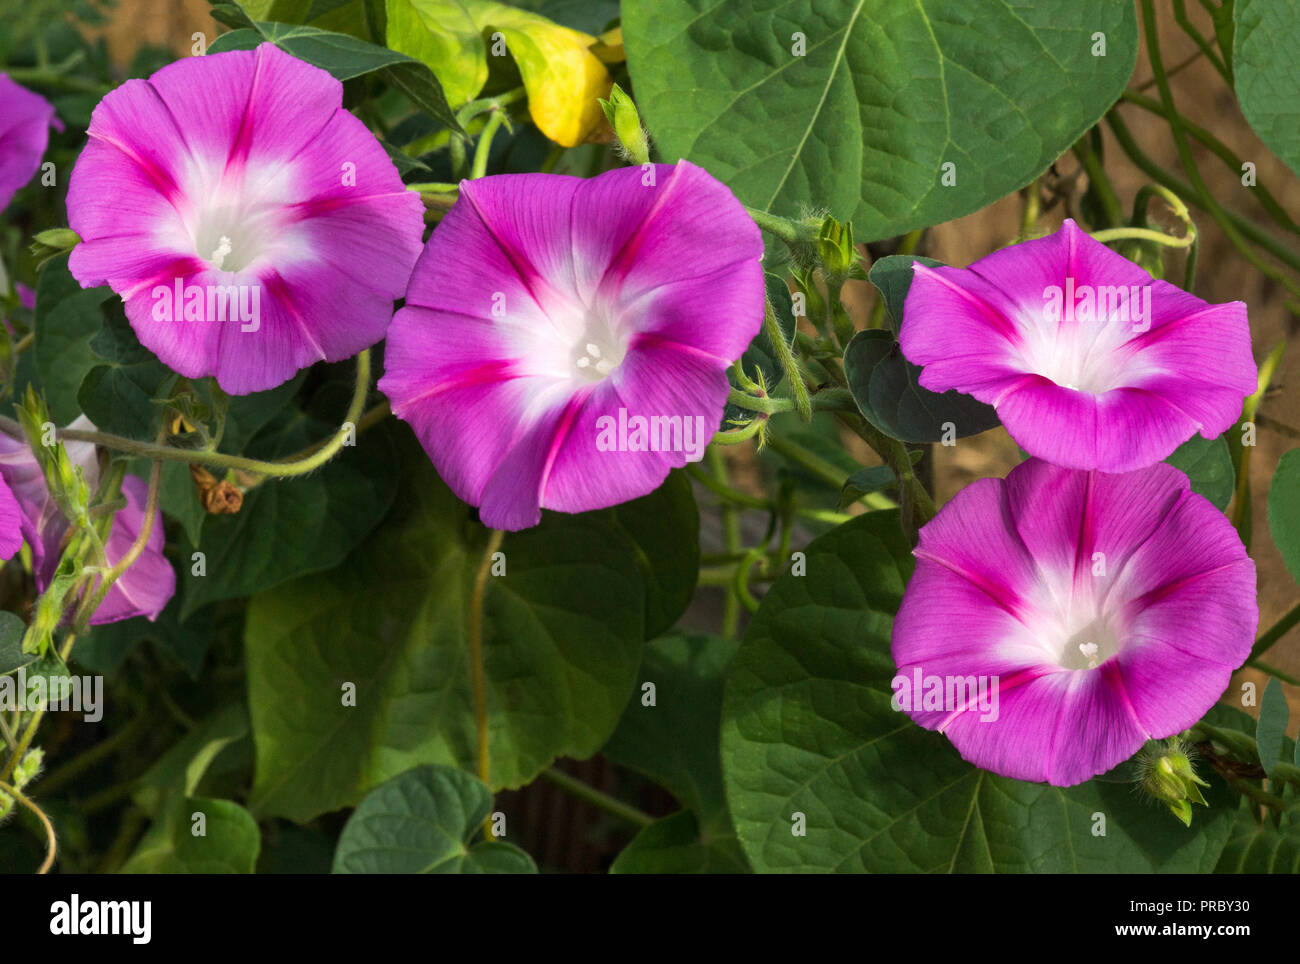 The flowers of the Morning Gory (Ipomoea nil var.Scarlet O'Hara. Stock Photo